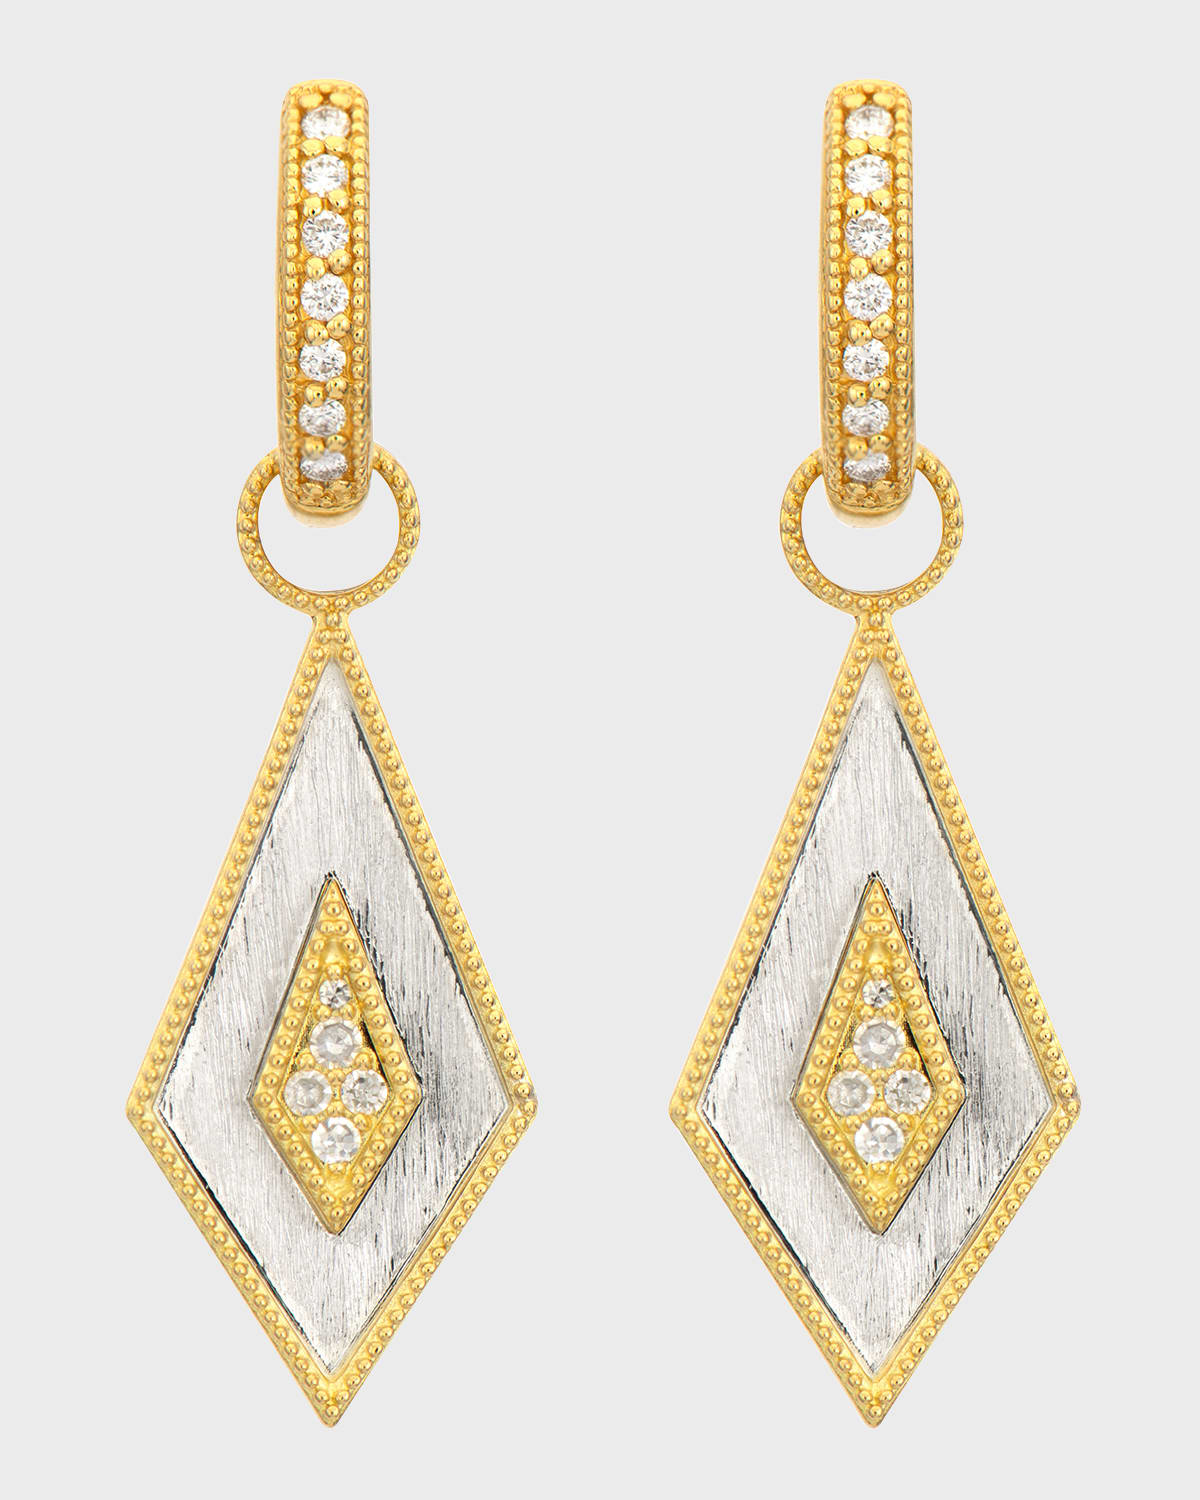 Jude Frances Mixed Metal Kite Earring Charms with Diamonds